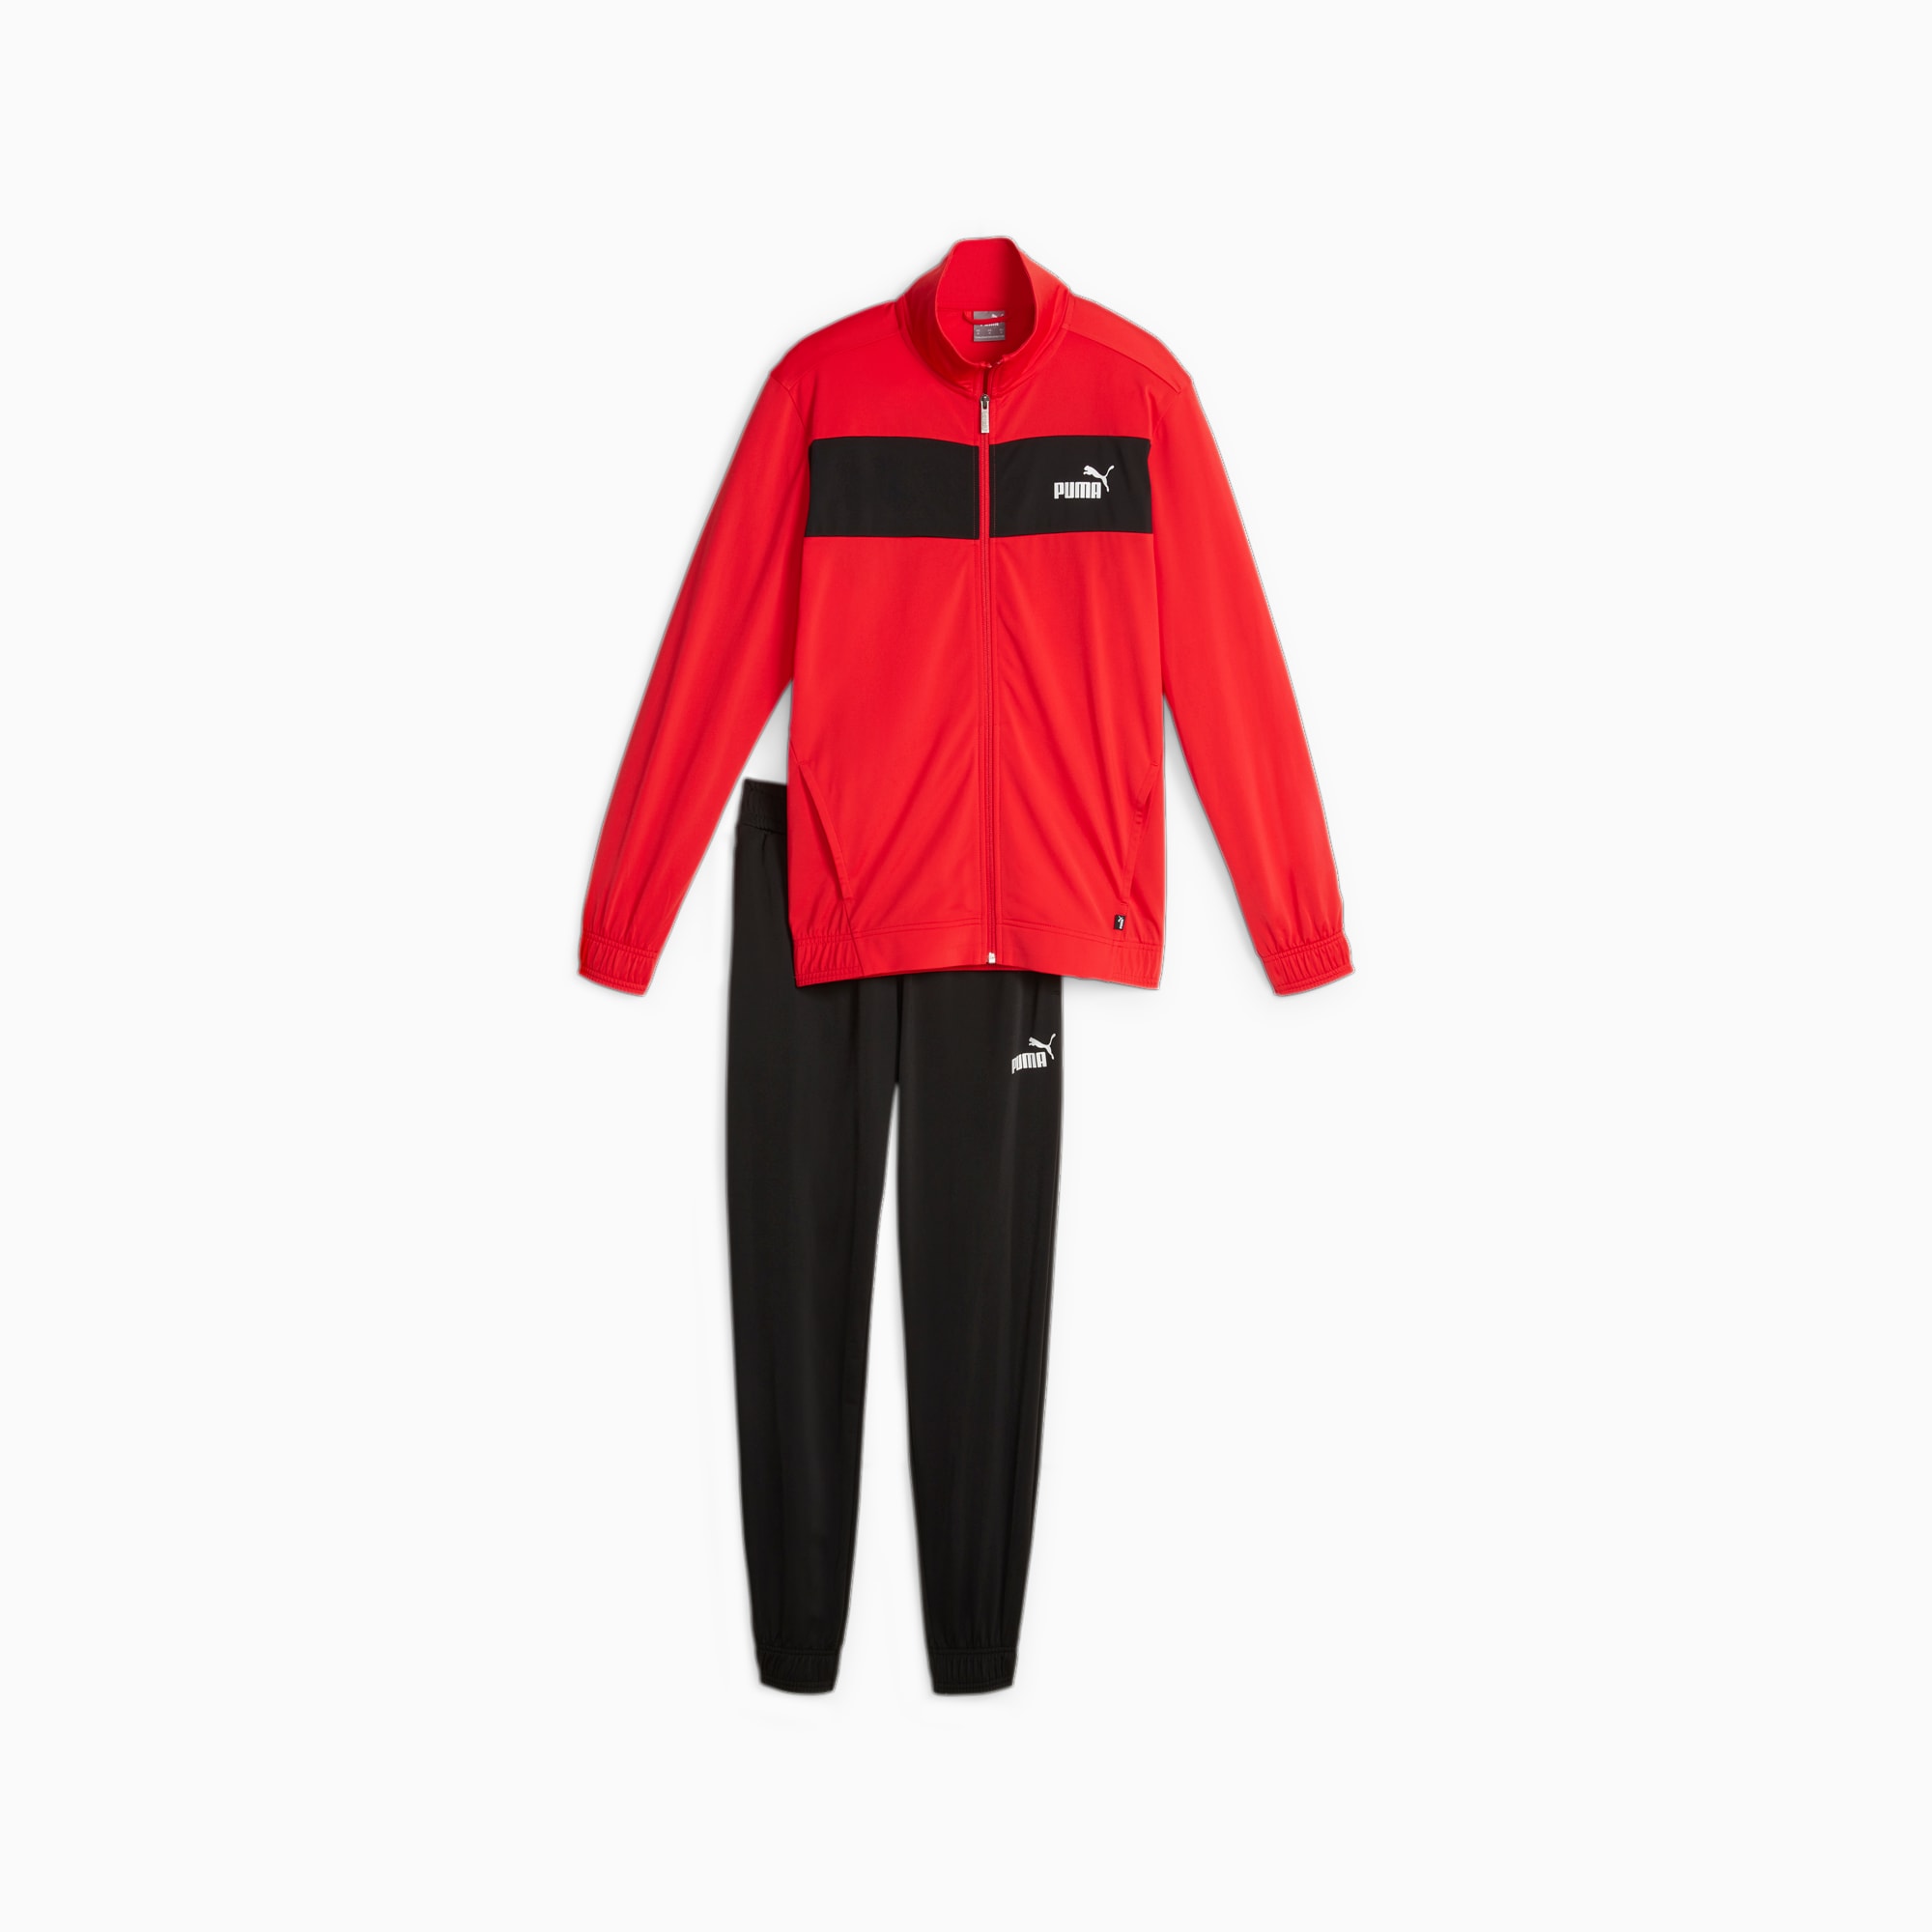 PUMA Men's Poly Tracksuit, For All Time Red, Size XXL, Clothing